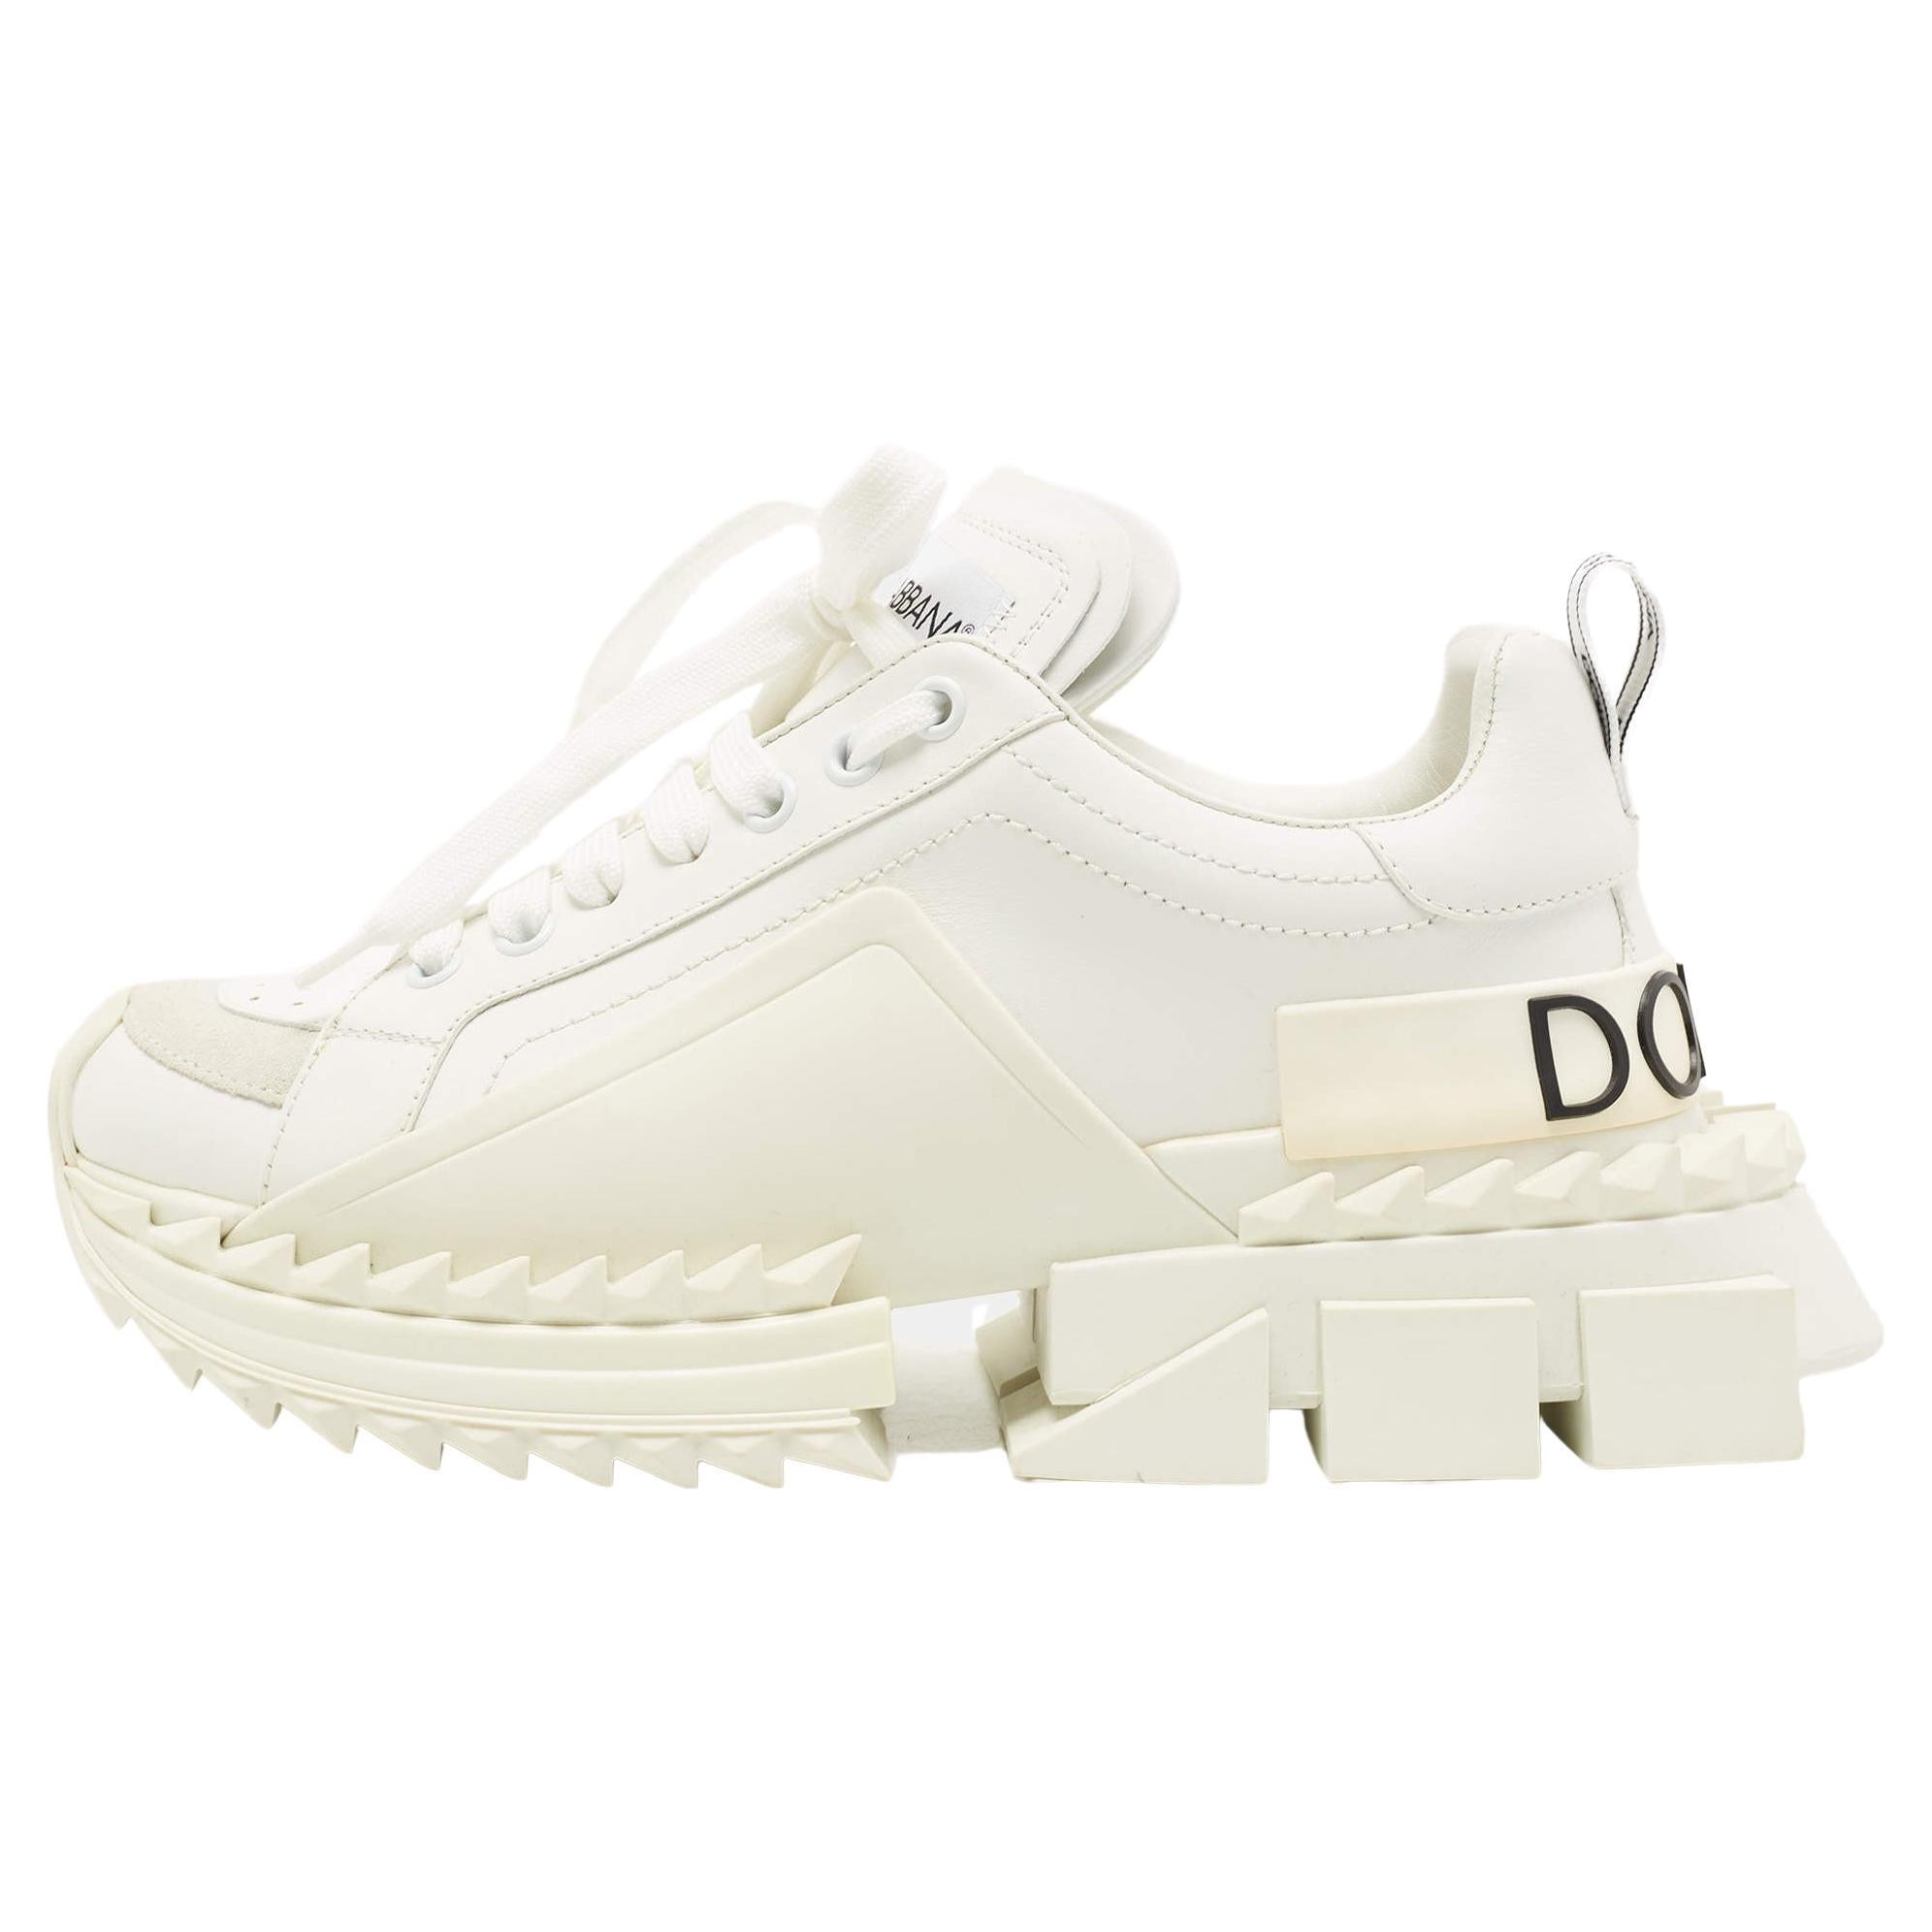 Dolce & Gabbana White Leather Super Queen Low Top Sneakers Size 37